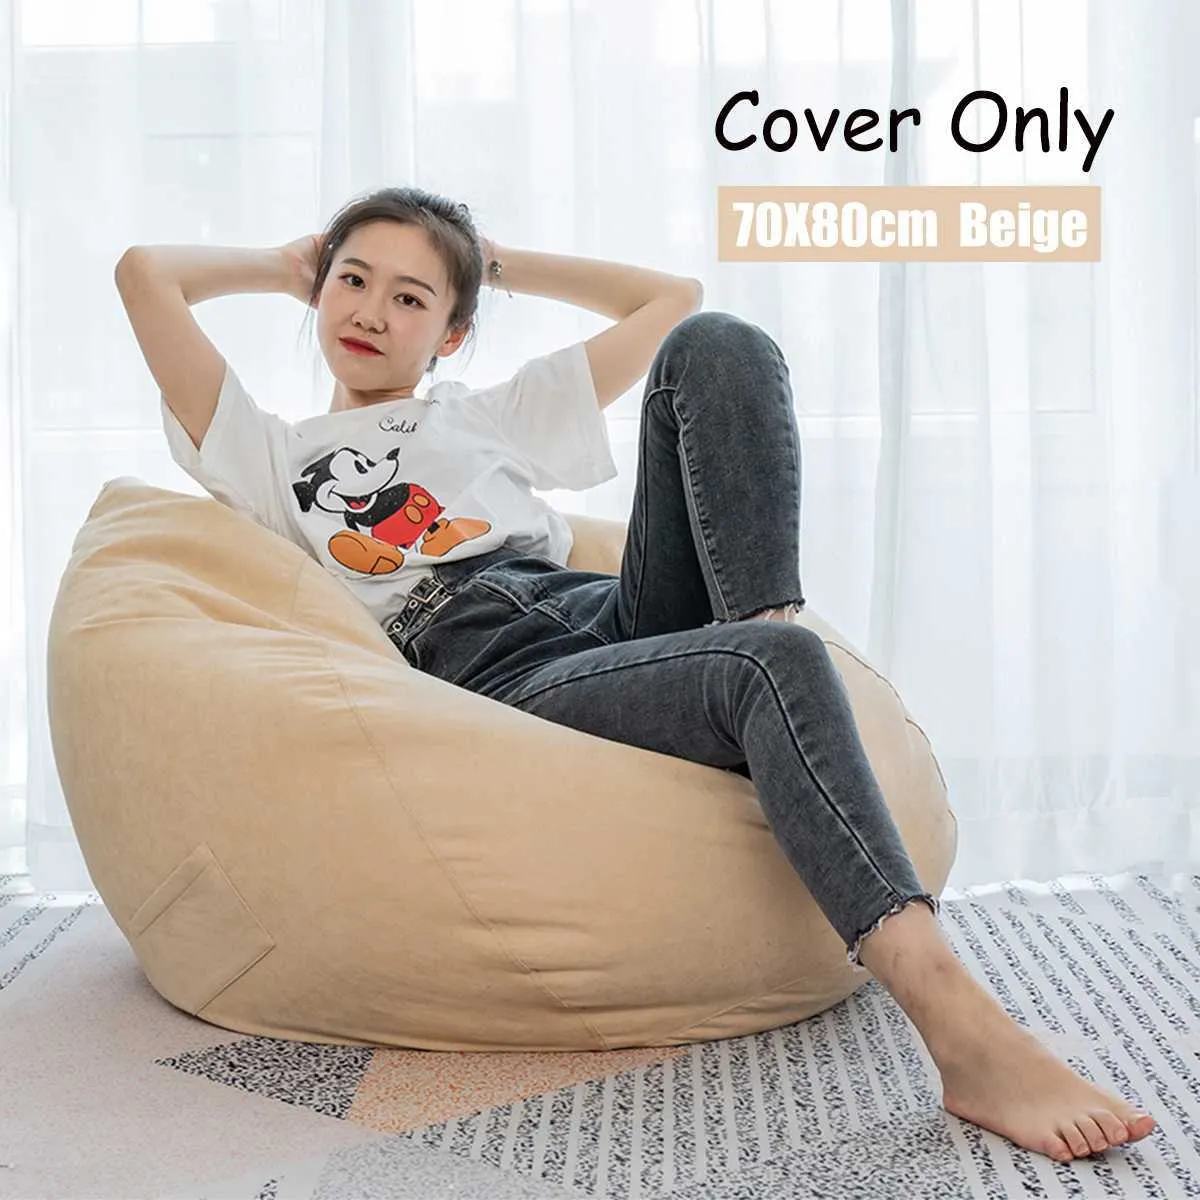 Sofas Cover puff Gigante Chairs Without Filler Linen Cloth Lounger Seat  Bean Bag Pouf Puff Couch Tatami Pouf Salon Puff Asiento